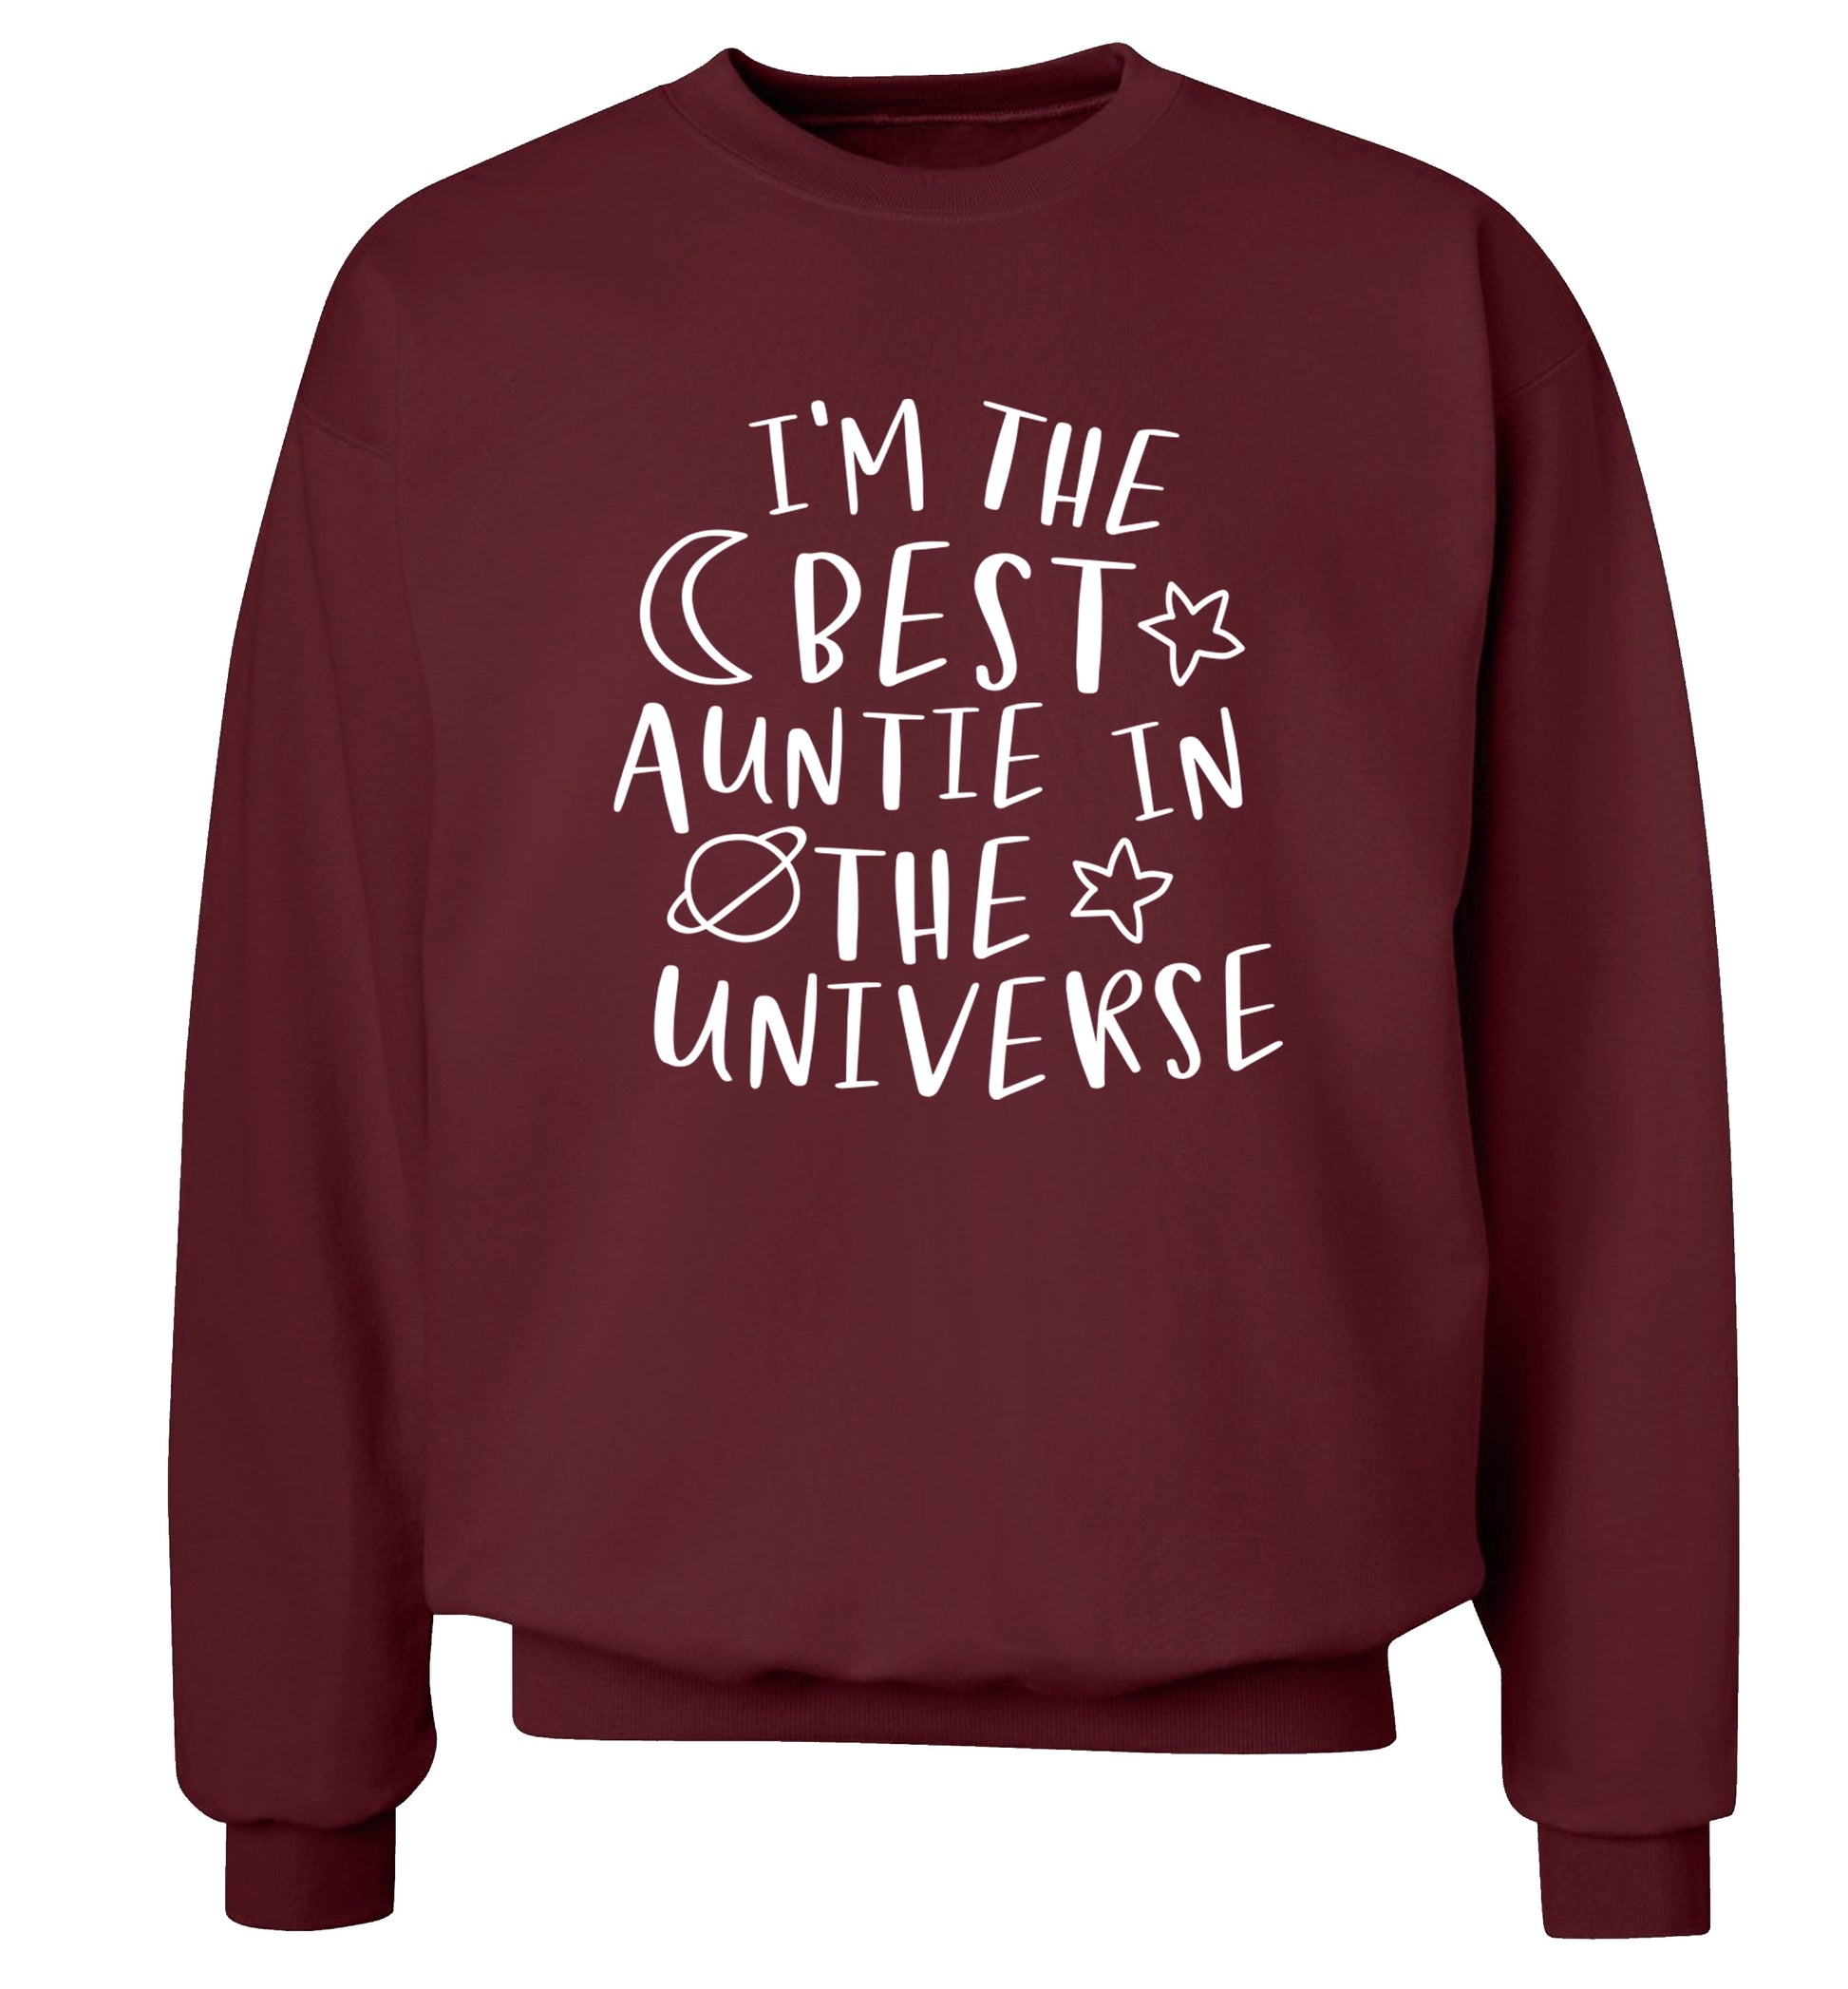 I'm the best auntie in the universe Adult's unisex maroon Sweater 2XL